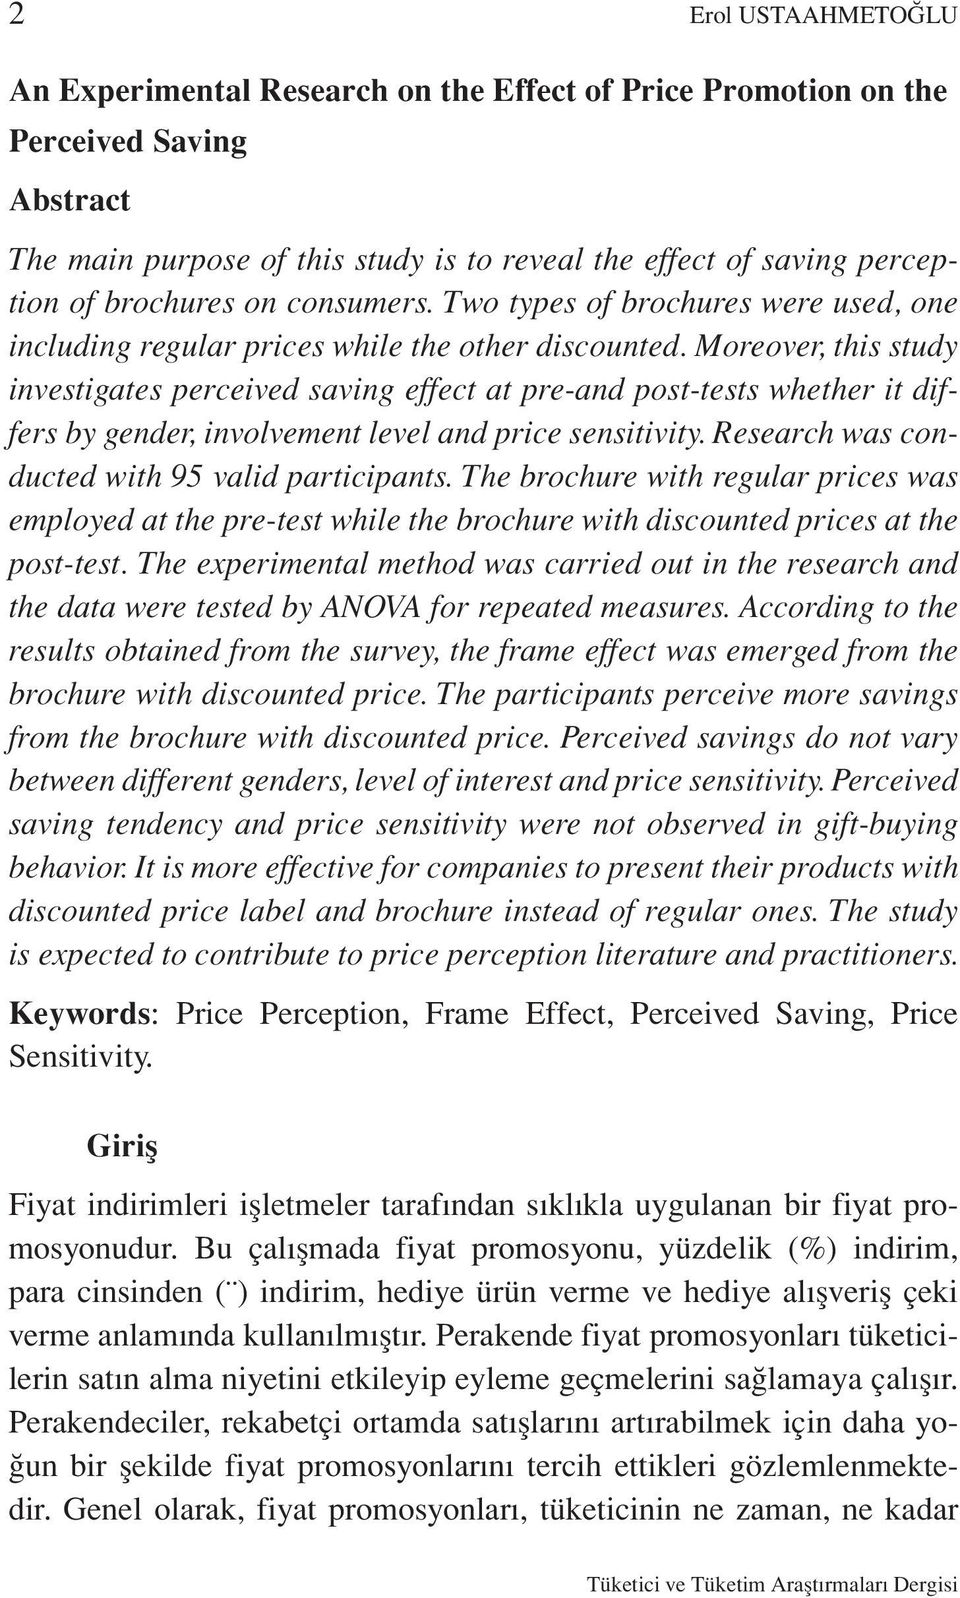 Moreover, this study investigates perceived saving effect at pre-and post-tests whether it differs by gender, involvement level and price sensitivity.